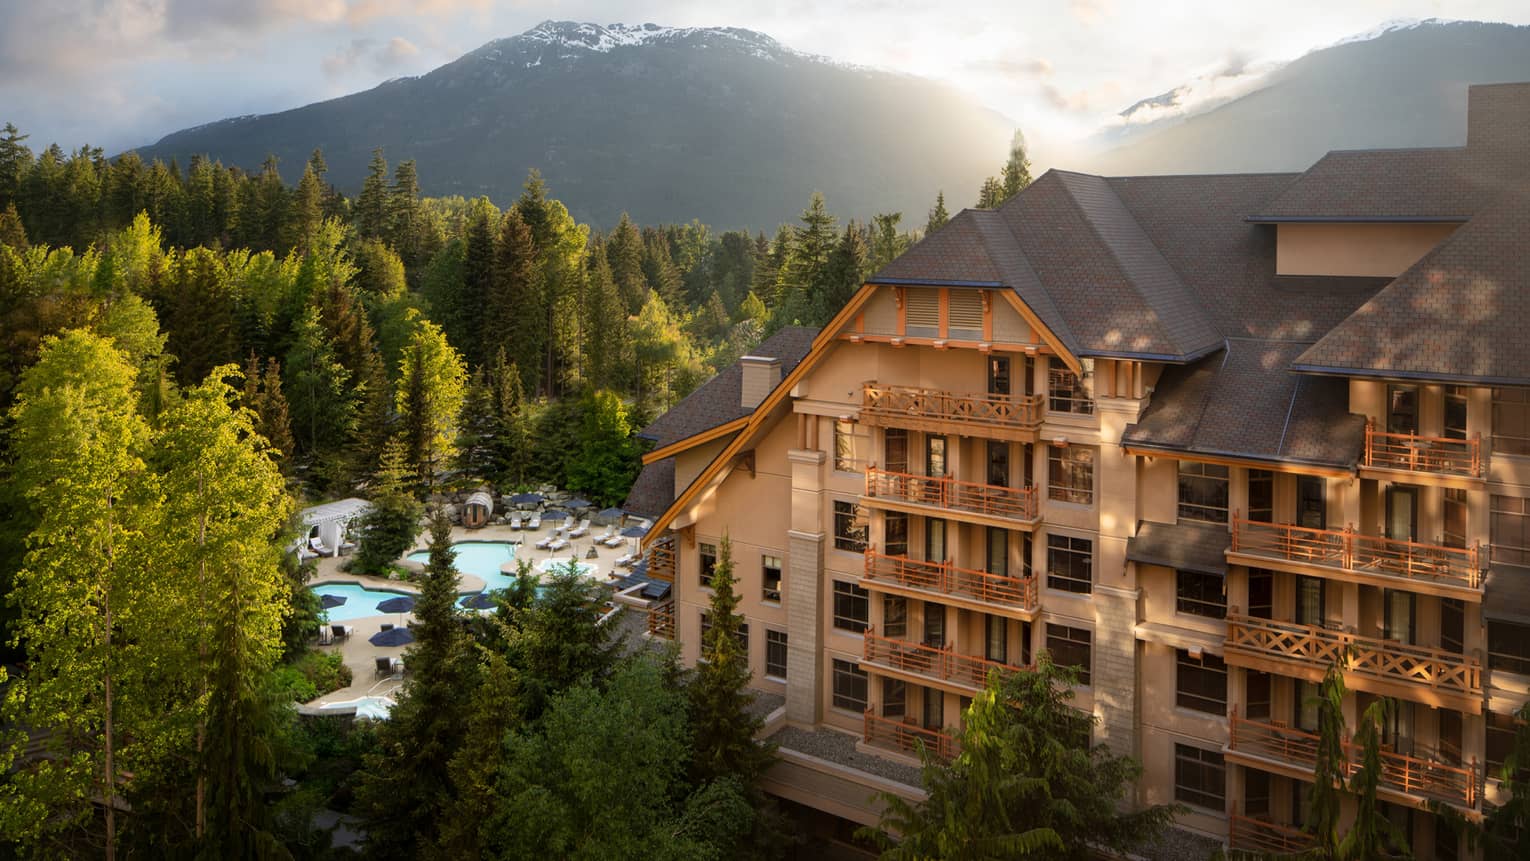 A large hotel building surrounded by mountains and trees during sunrise.